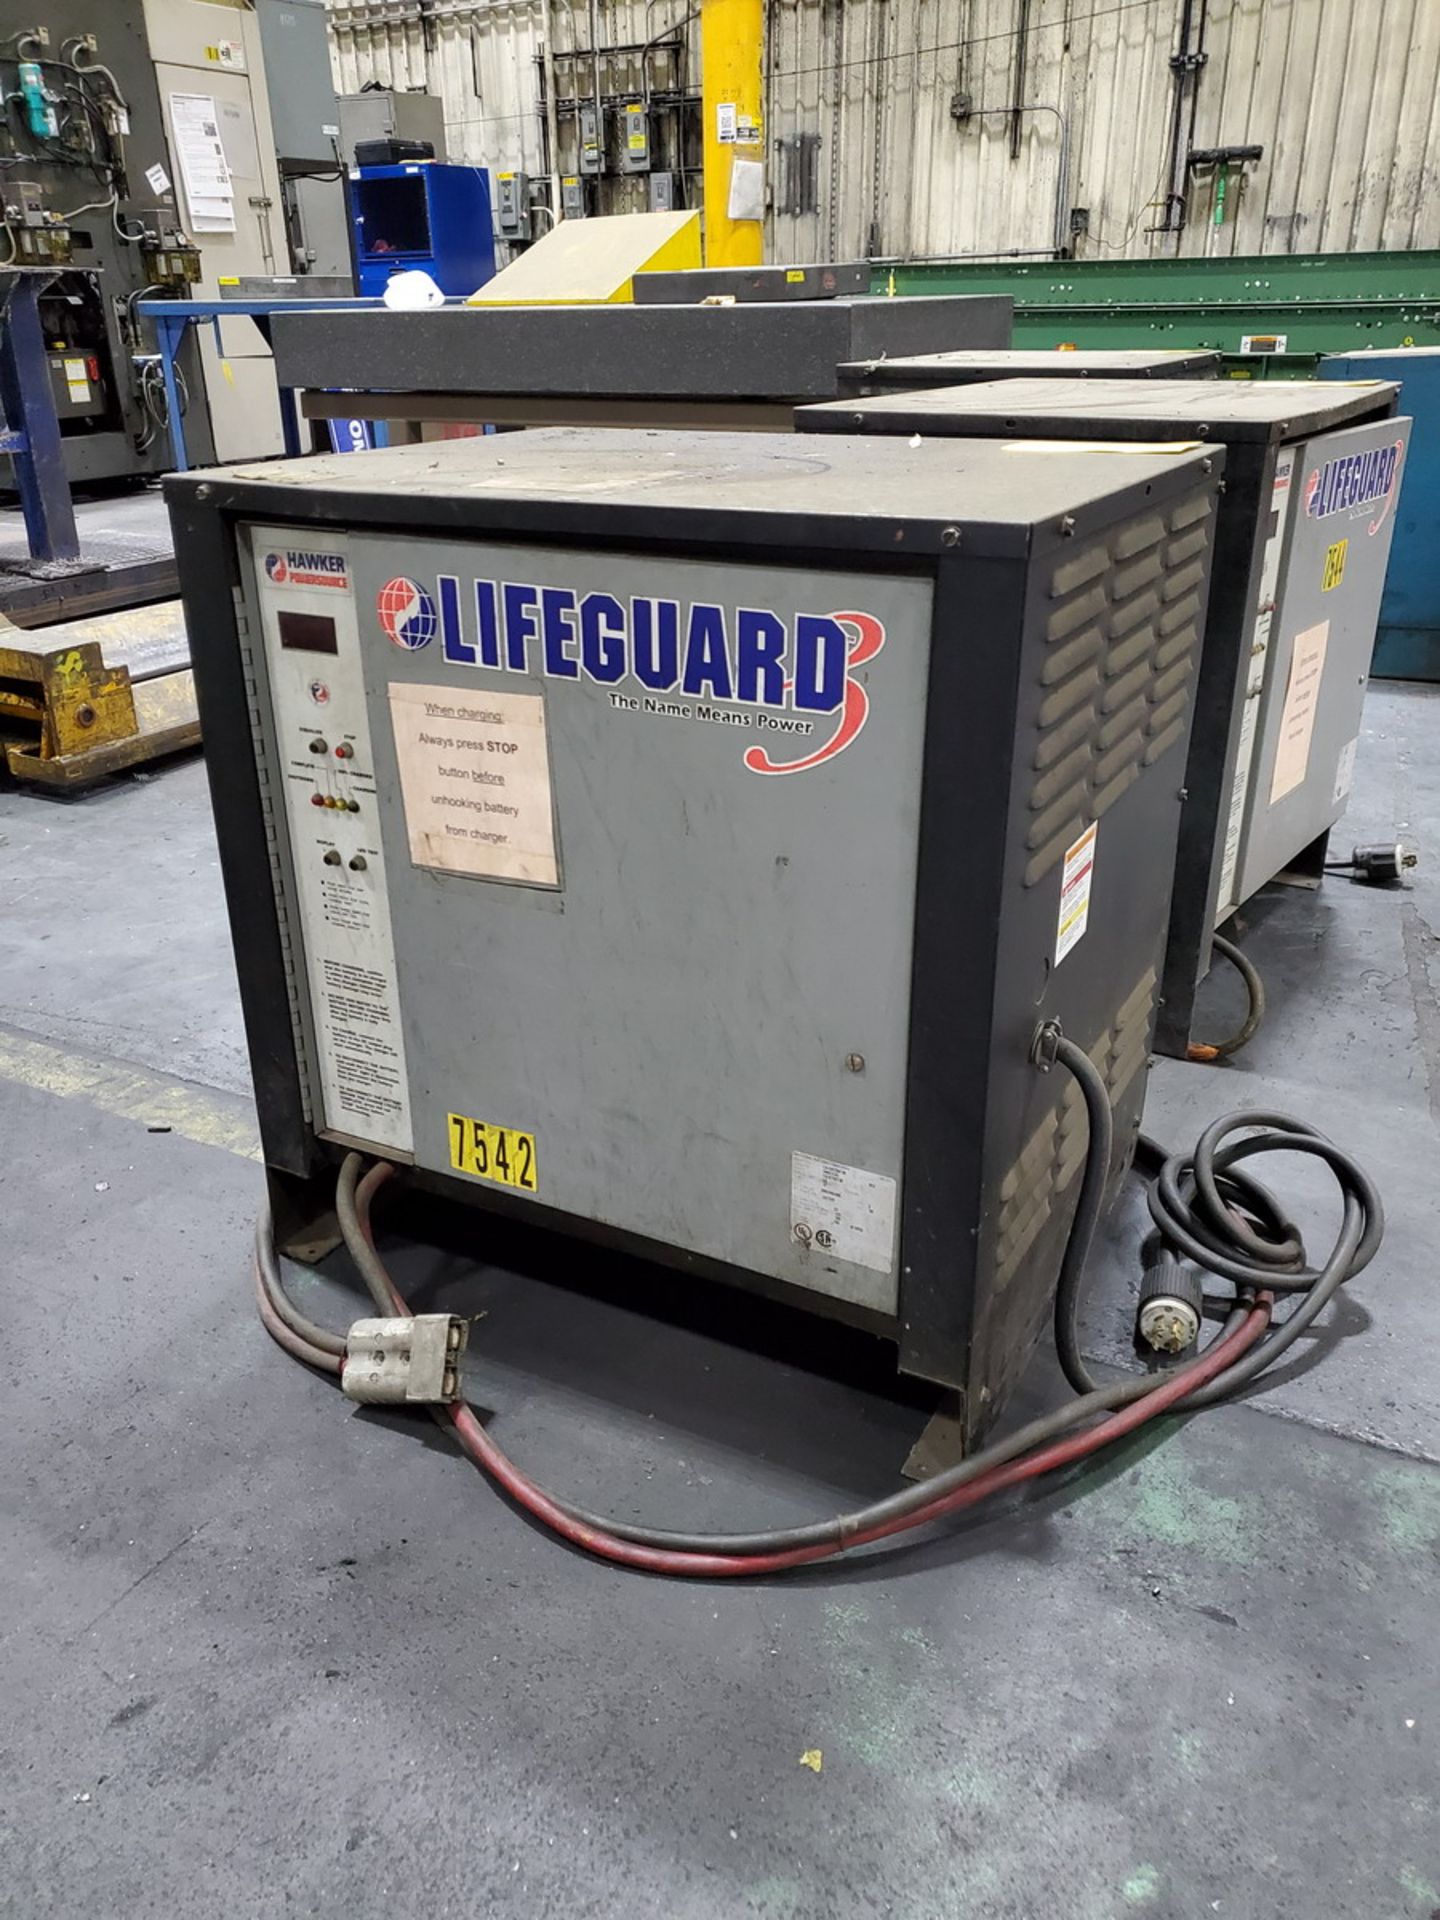 Lifeguard Industrial Battery Charger 8hr Charge Time, 208/240/480V, 3PH, 60HZ - Image 3 of 5